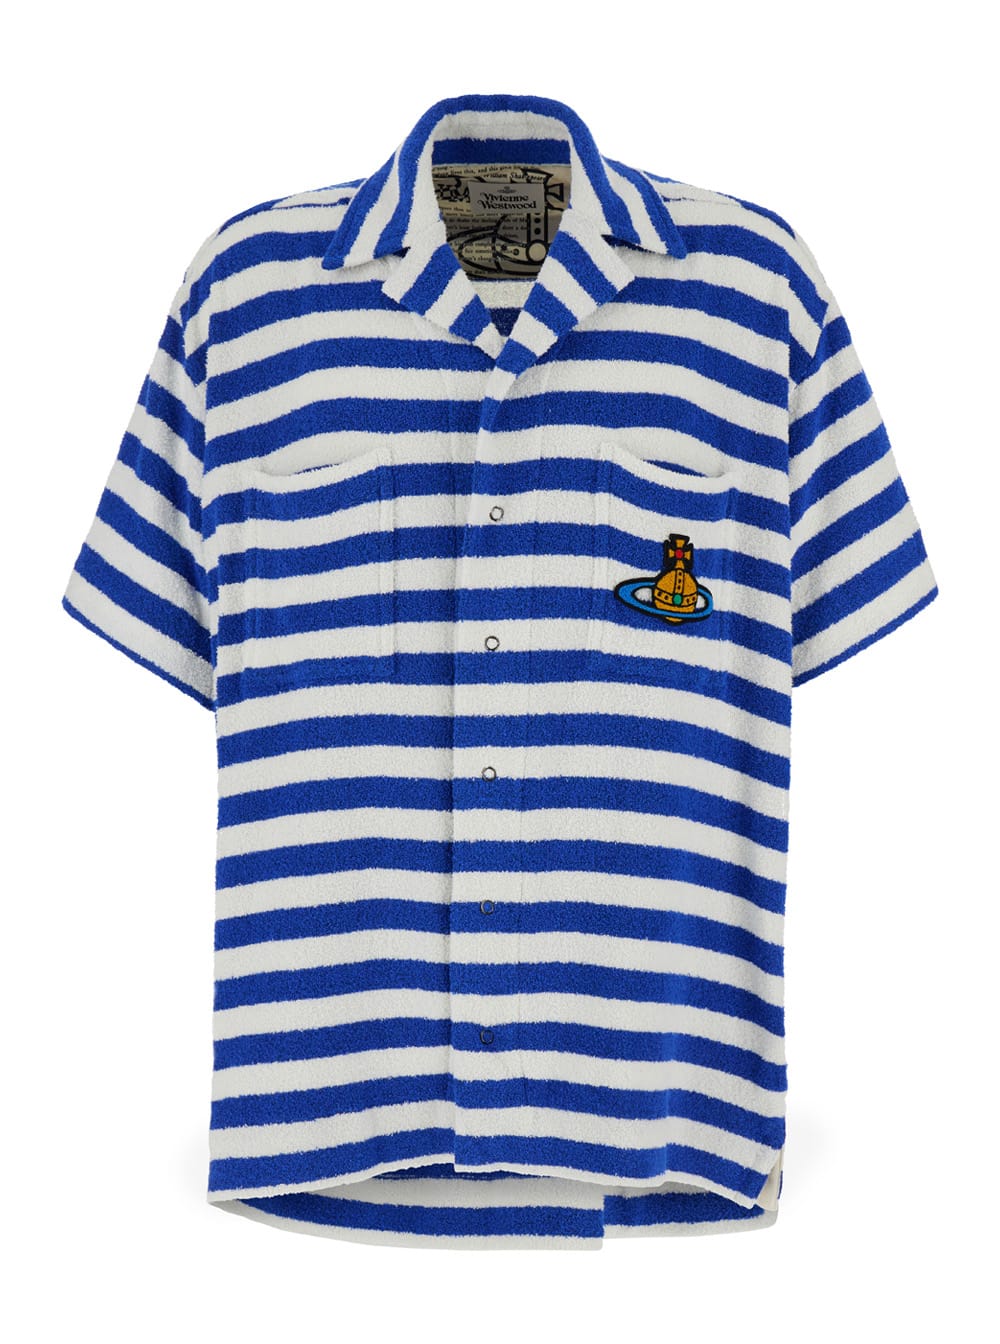 Blue And White Striped Bowling Shirt With Orb Embroidery In Cotton Blend Man